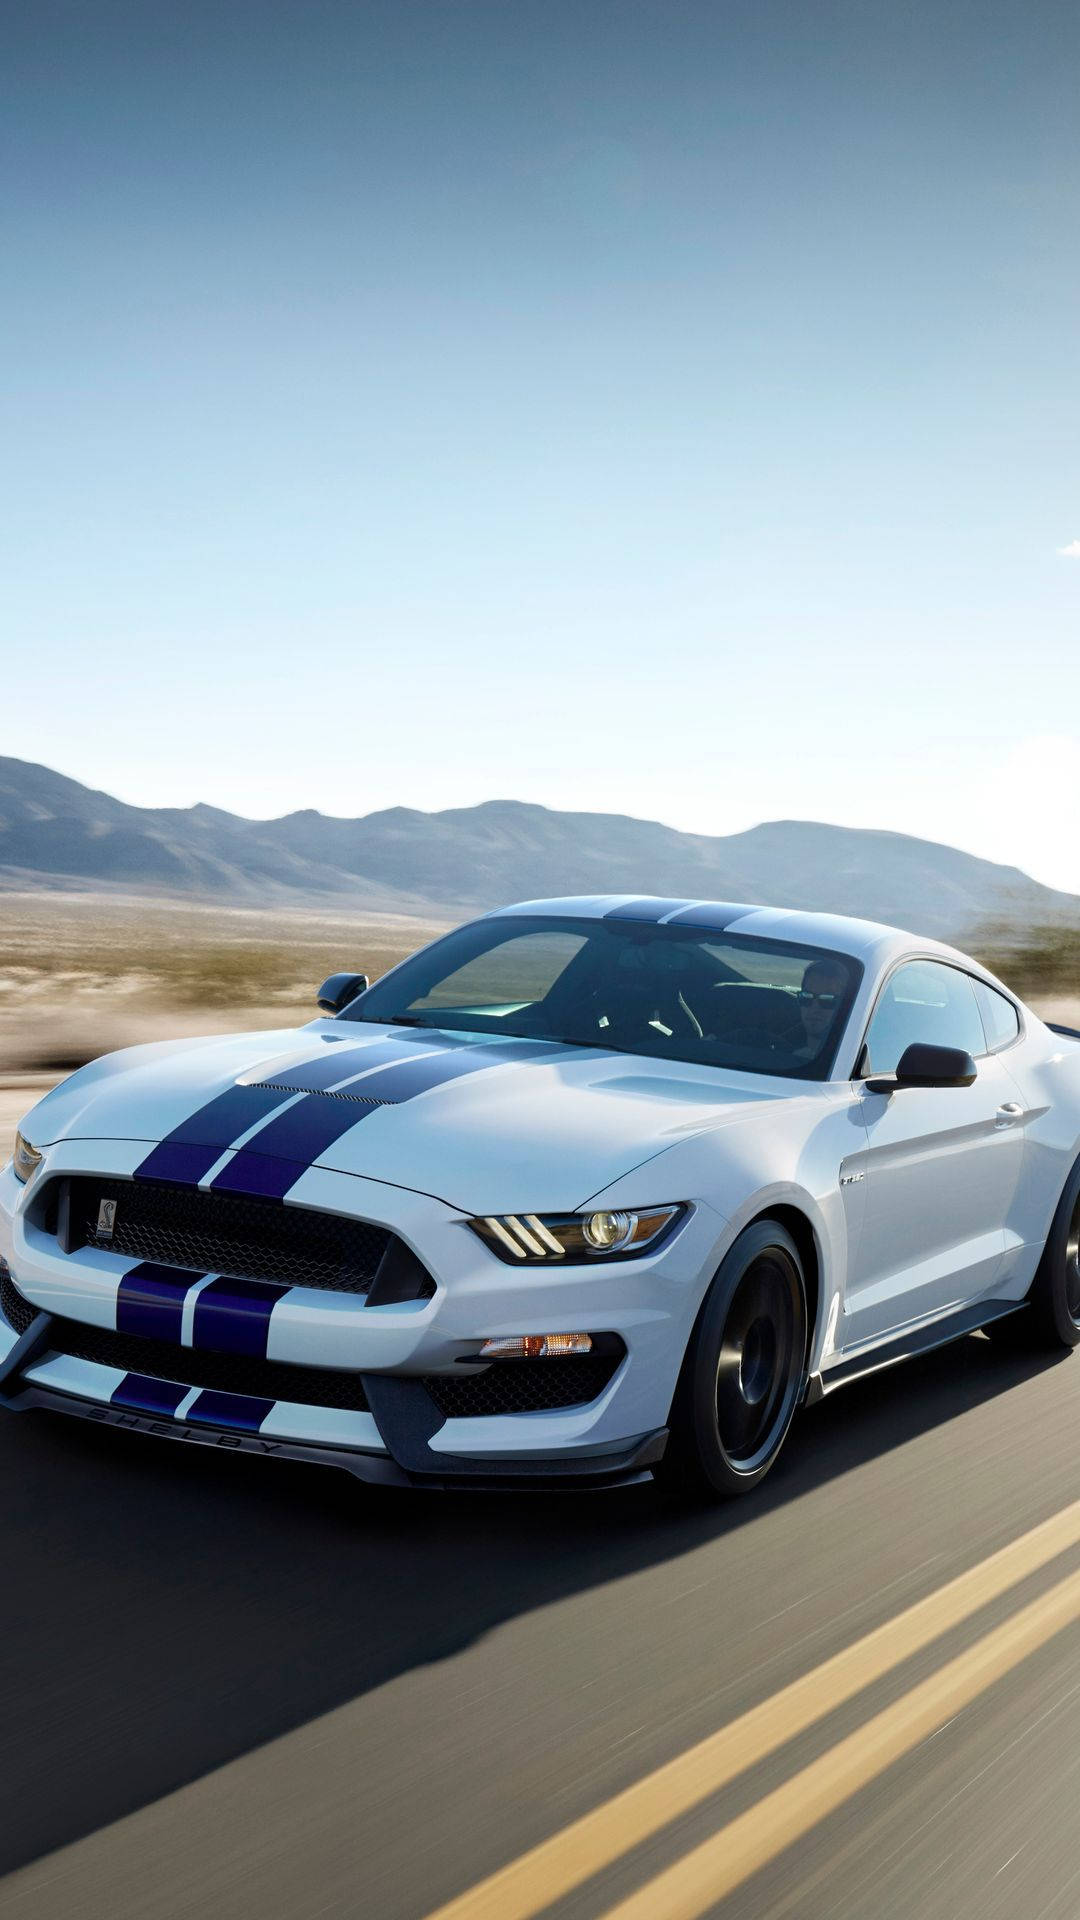 Shelby Mustang Gt350 Heritage Background